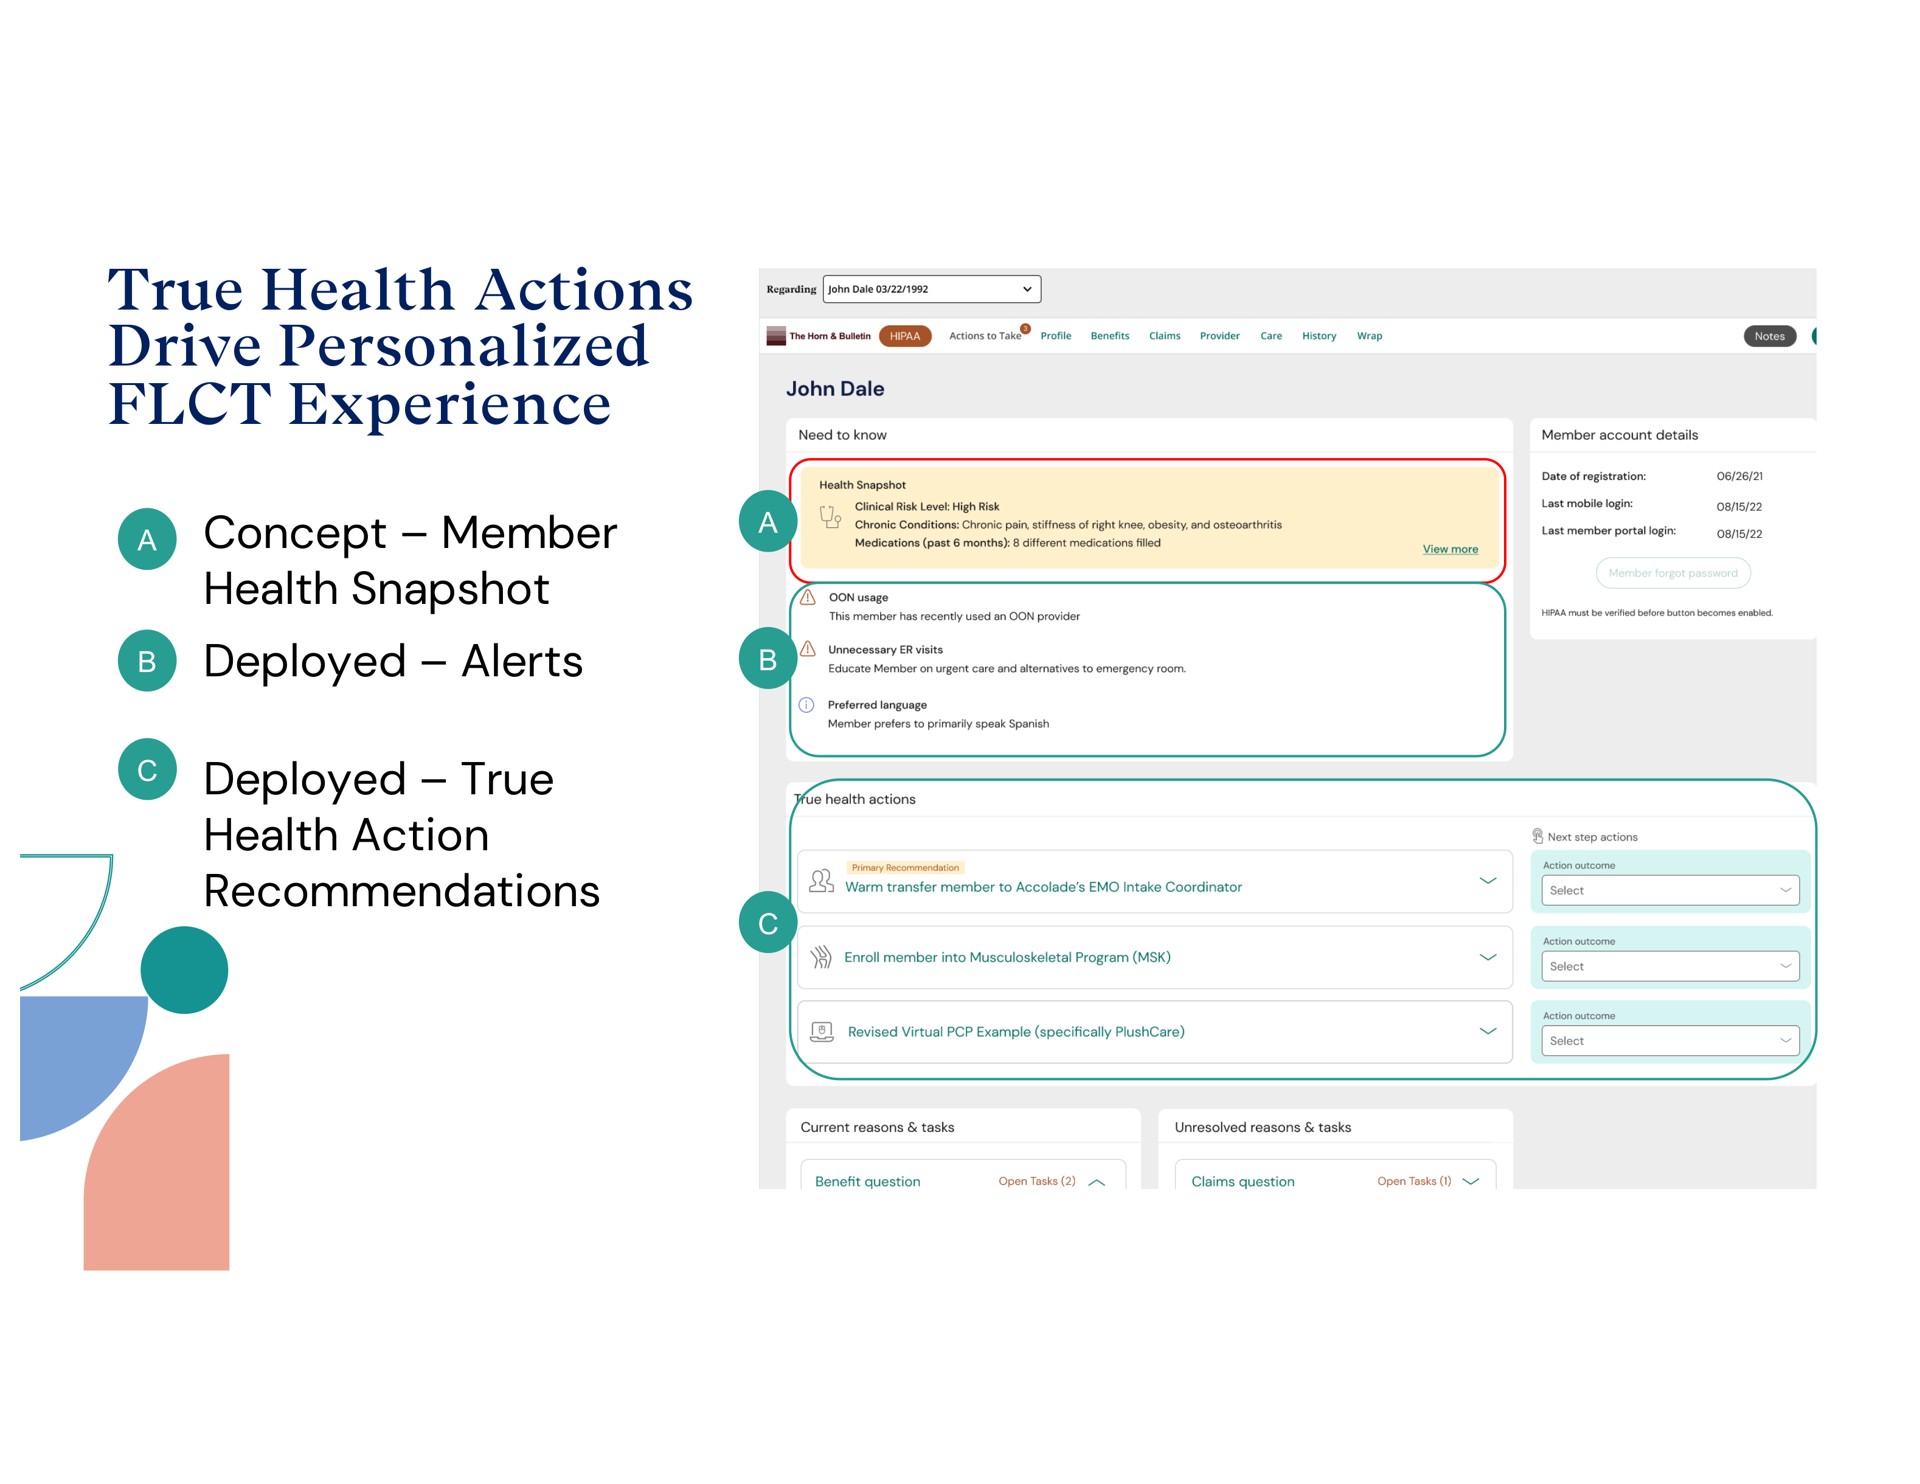 true health actions drive personalized experience | Accolade